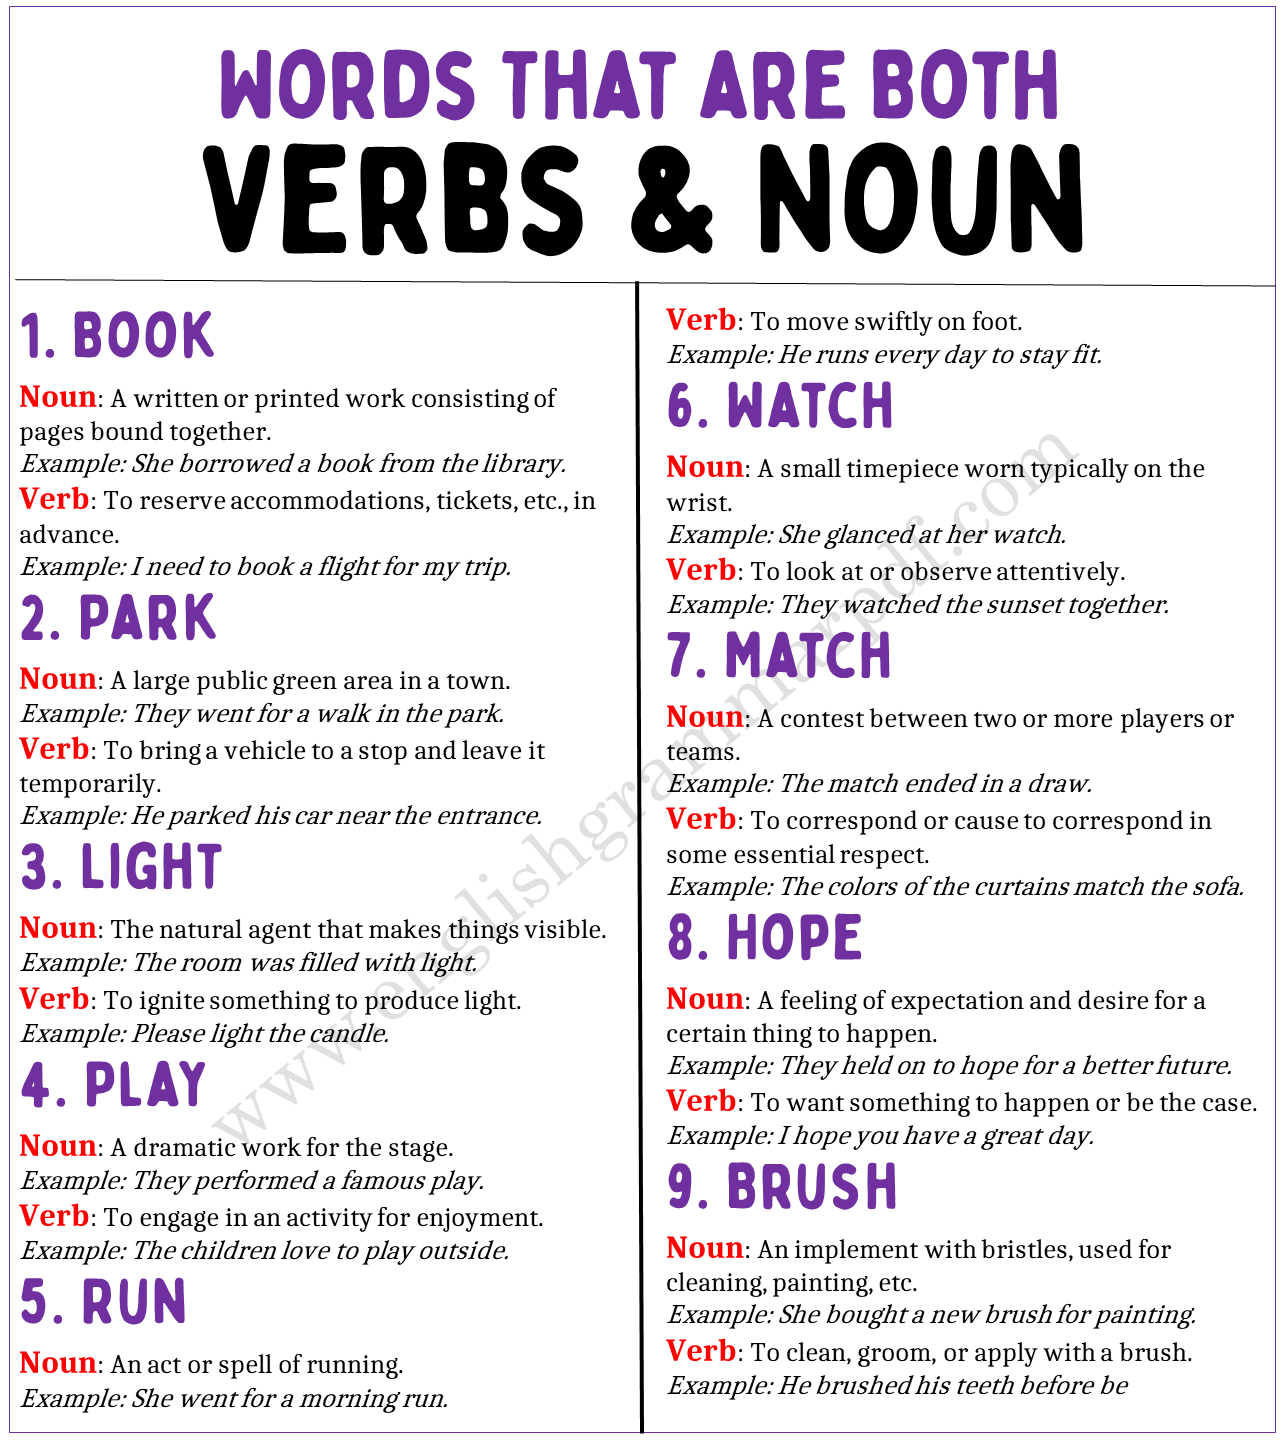 Words that are Both Verbs and Nouns